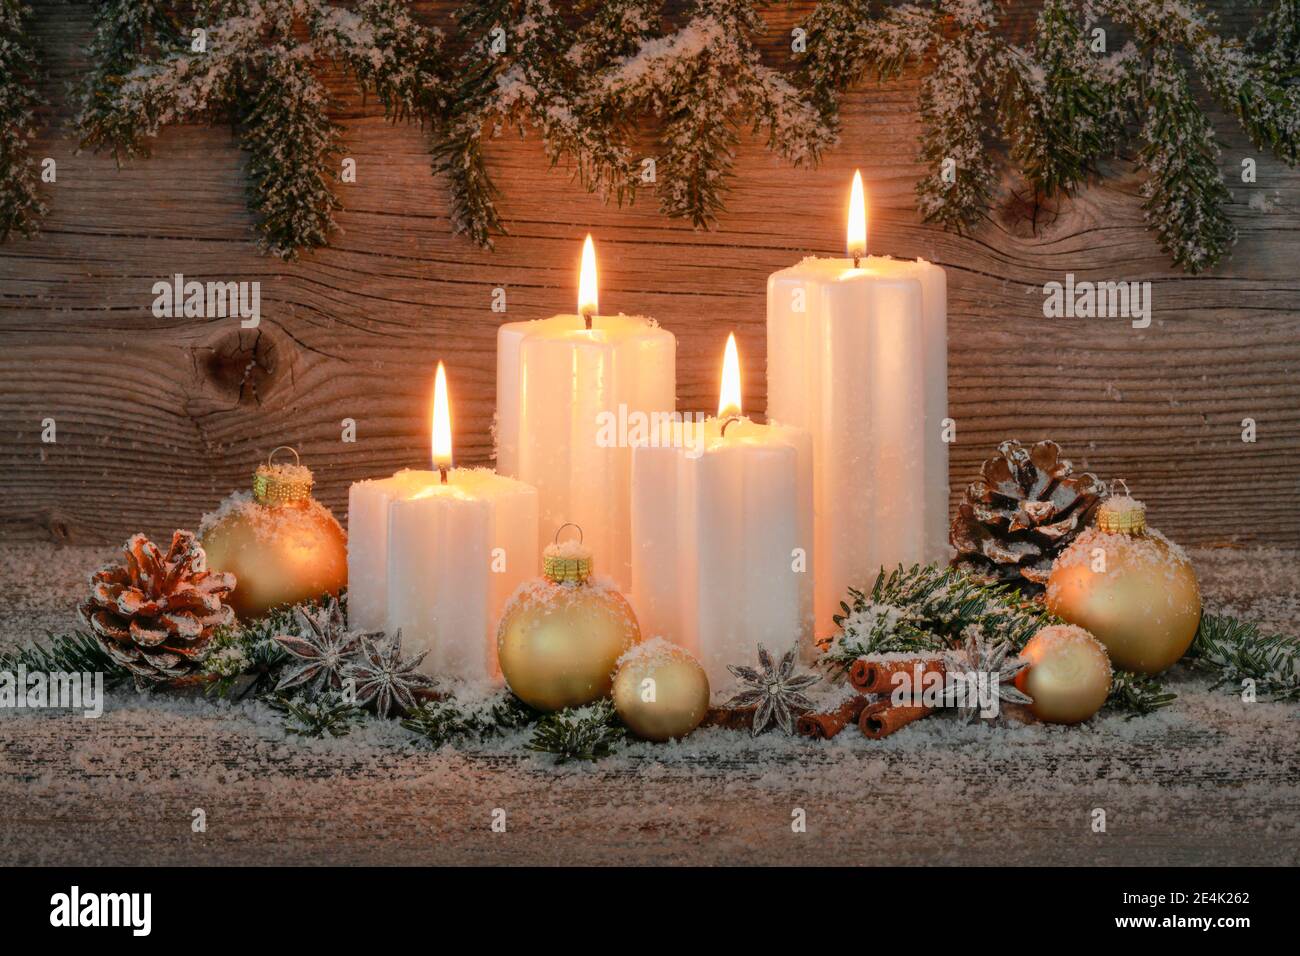 Natural advent decoration with 4 burning candles Stock Photo